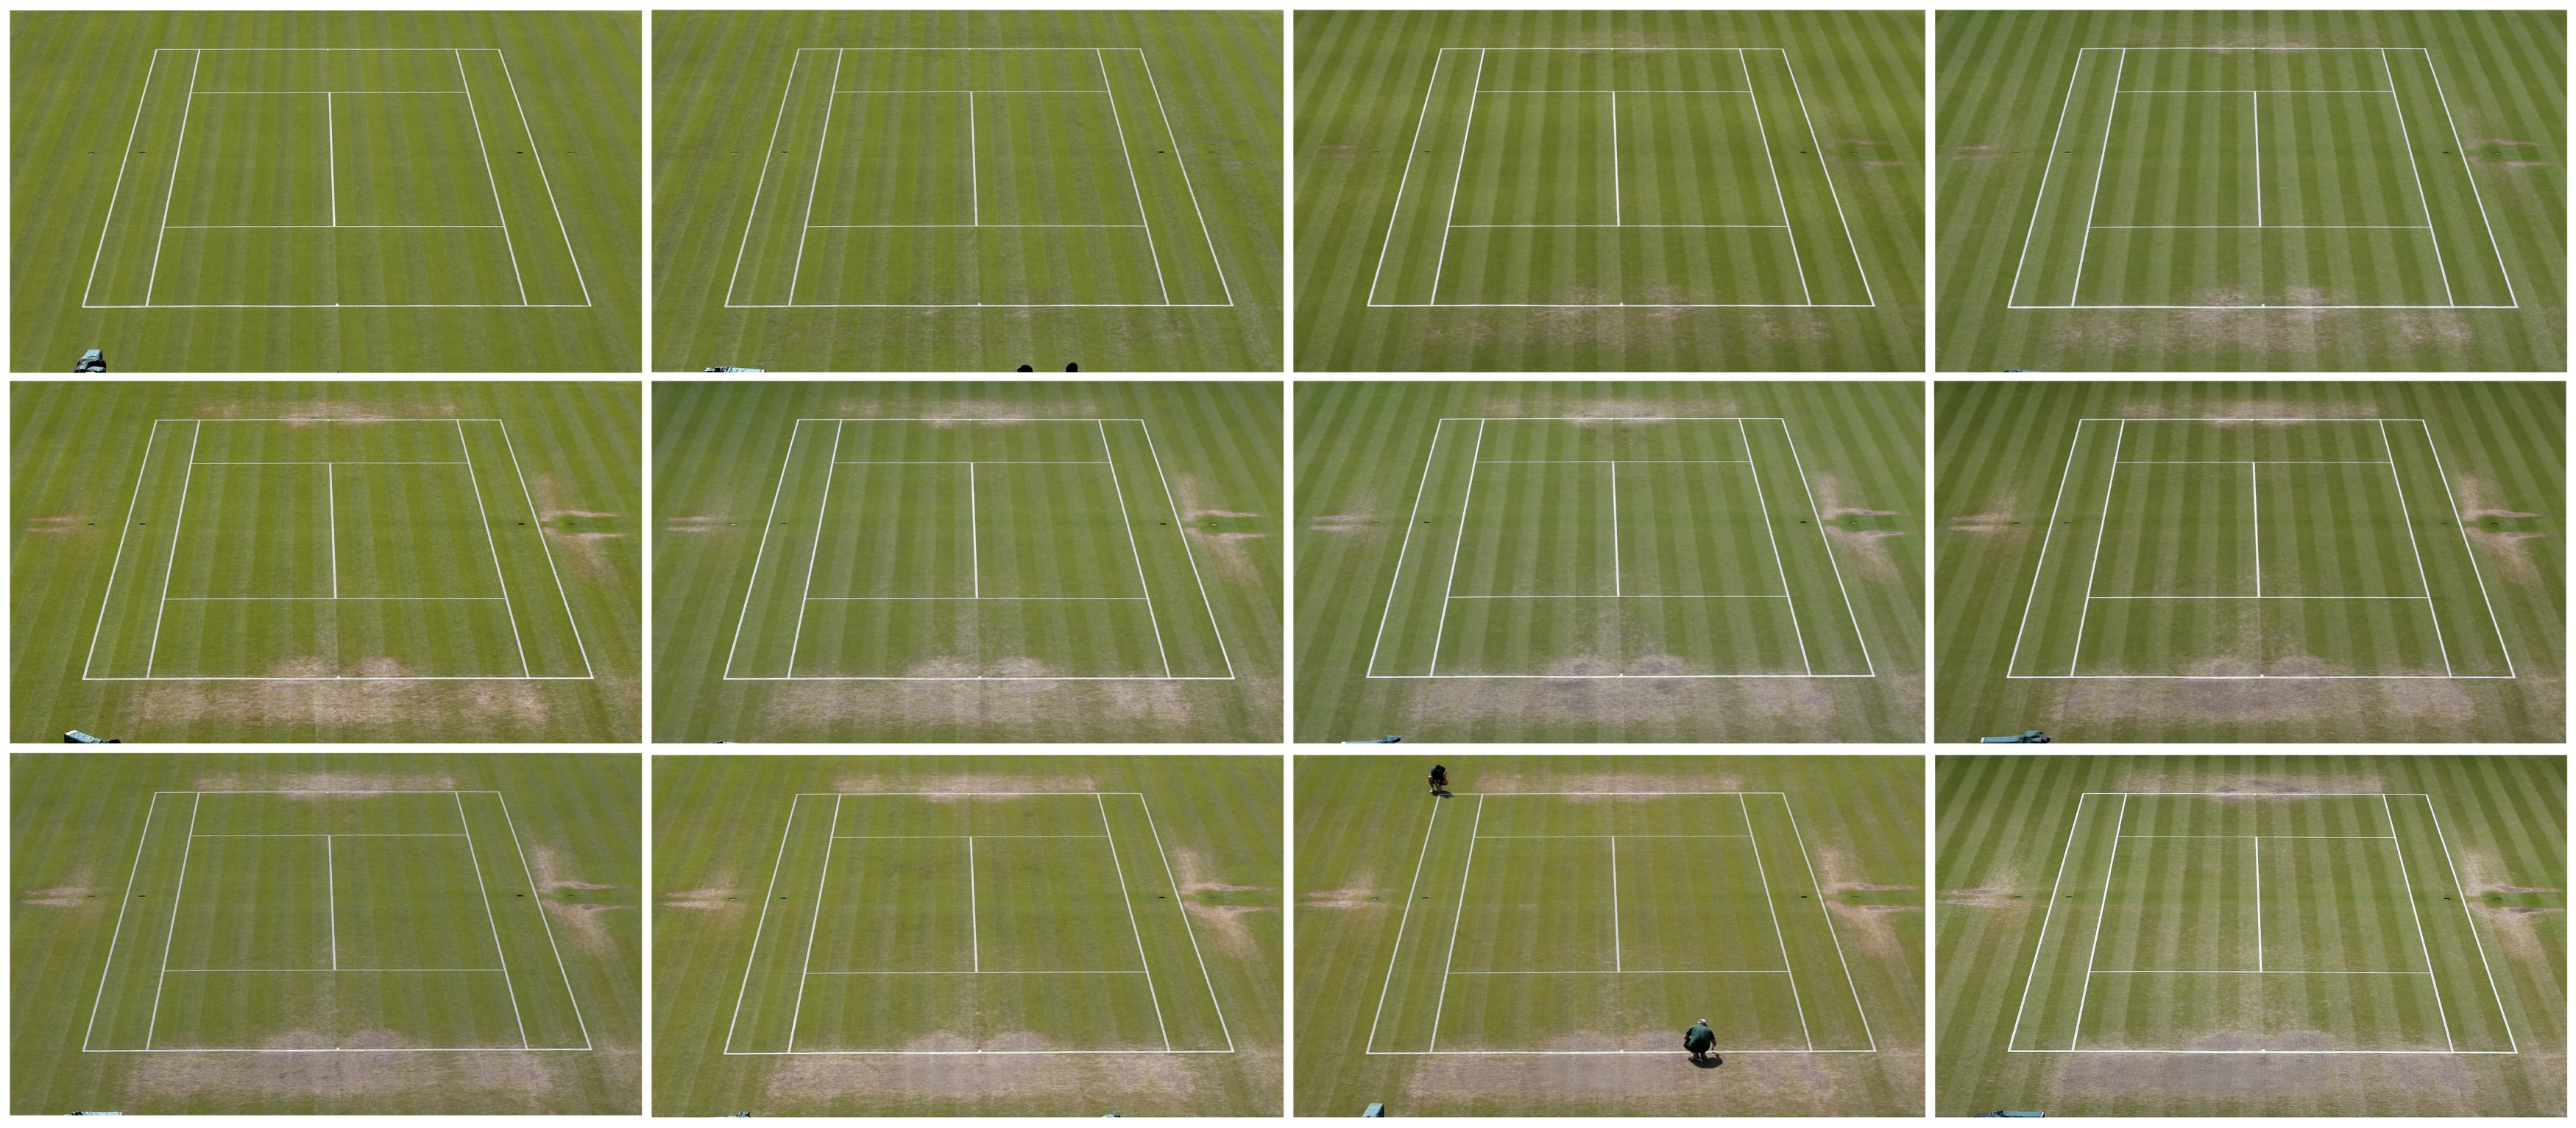 A combination of images show the grass surface of Centre Court at the All England Lawn Tennis and Croquet Club during the Wimbledon Tennis Championships from June 29 to July 12, 2015. The Wimbledon Tennis Championships is the only Grand Slam tournament that is played on grass, a surface that wears over the course of the two week competition. REUTERS/Stefan Wermuth